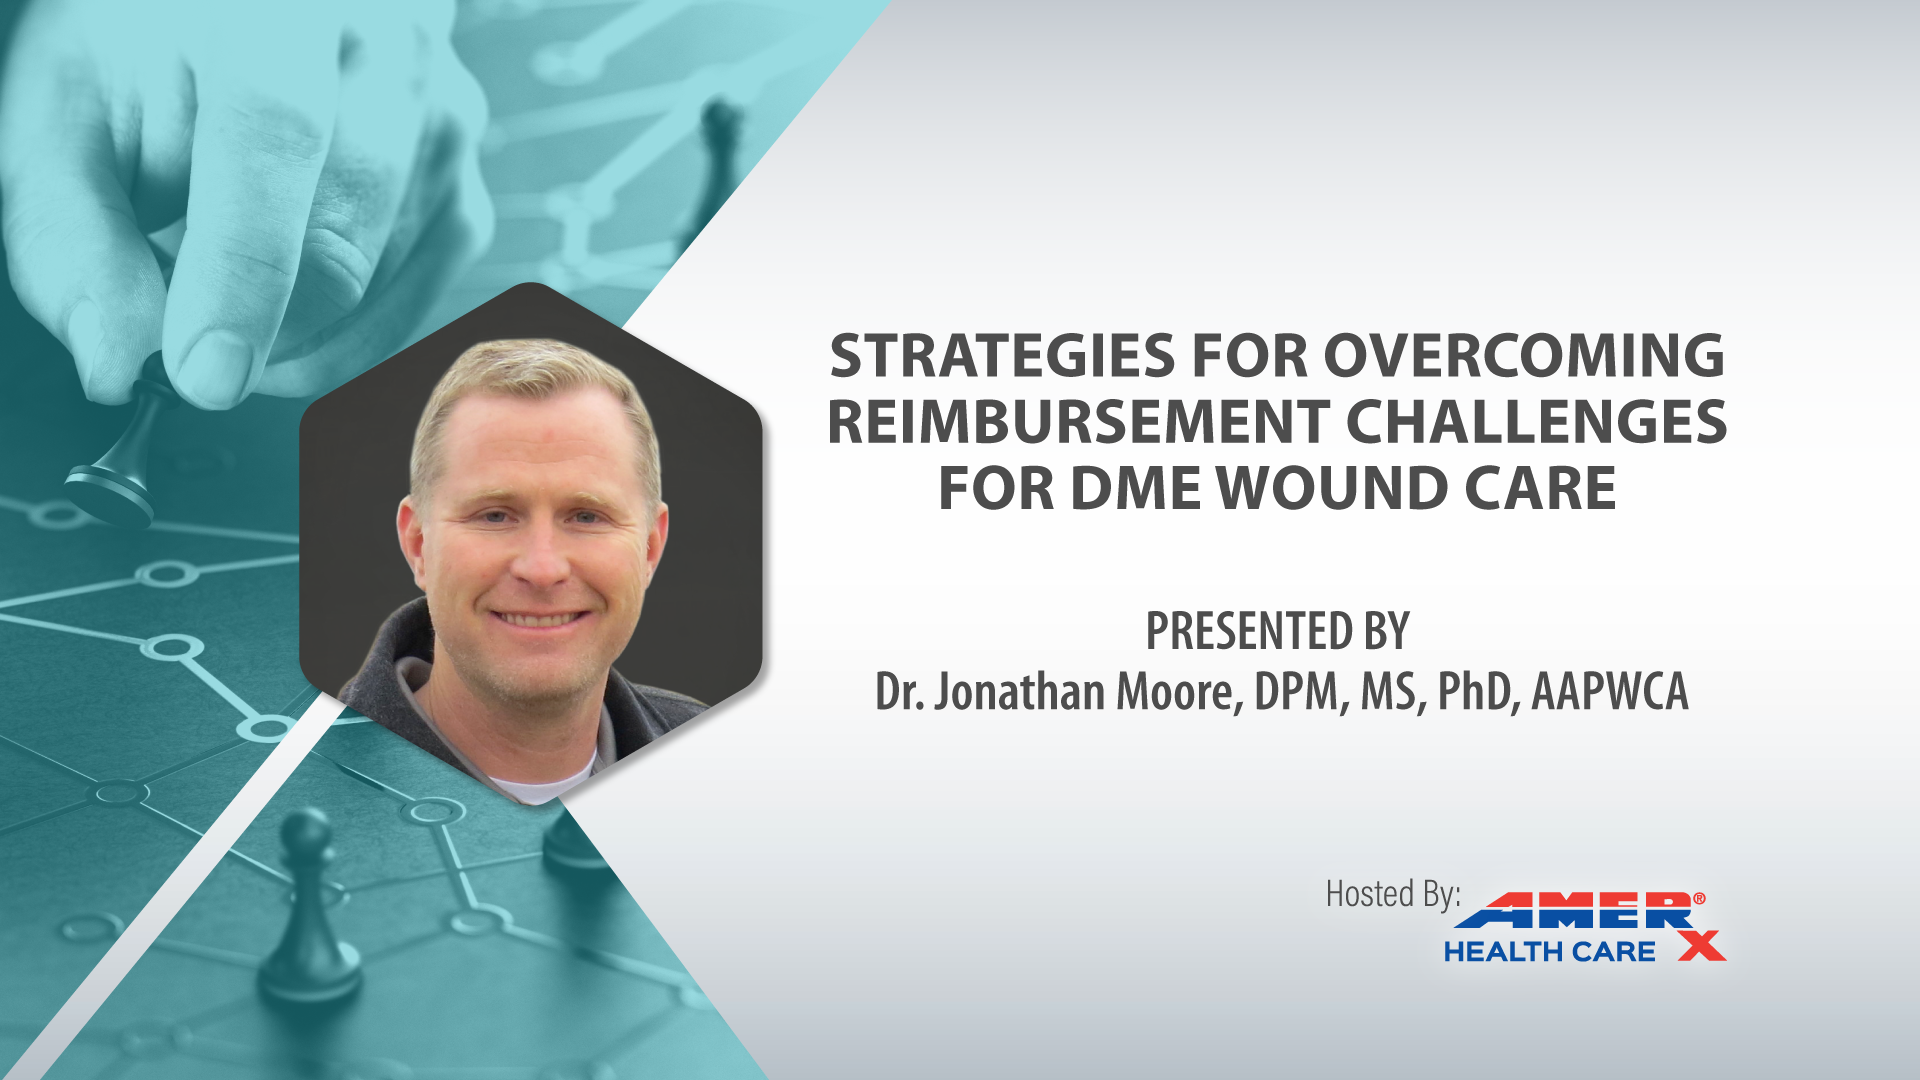 Title of Webinar: STRATEGIES FOR OVERCOMING REIMBURSEMENT CHALLENGES FOR DME WOUND CARE